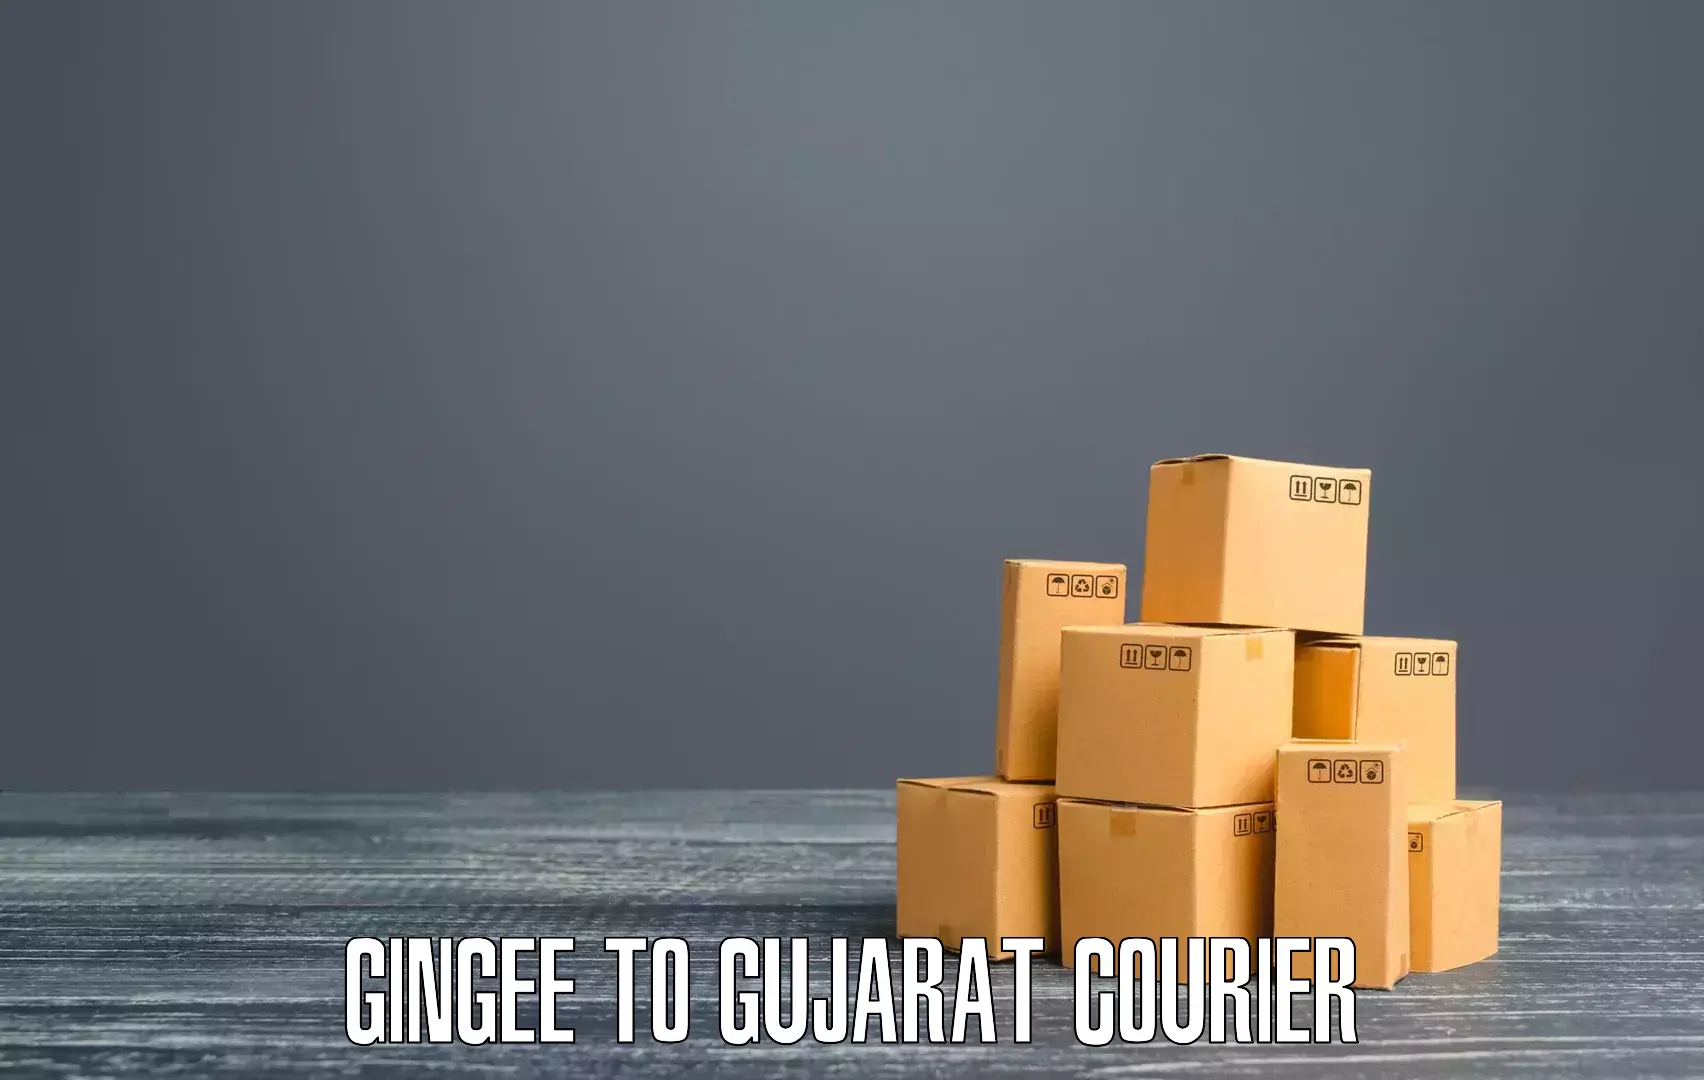 Courier service efficiency Gingee to Girgadhada